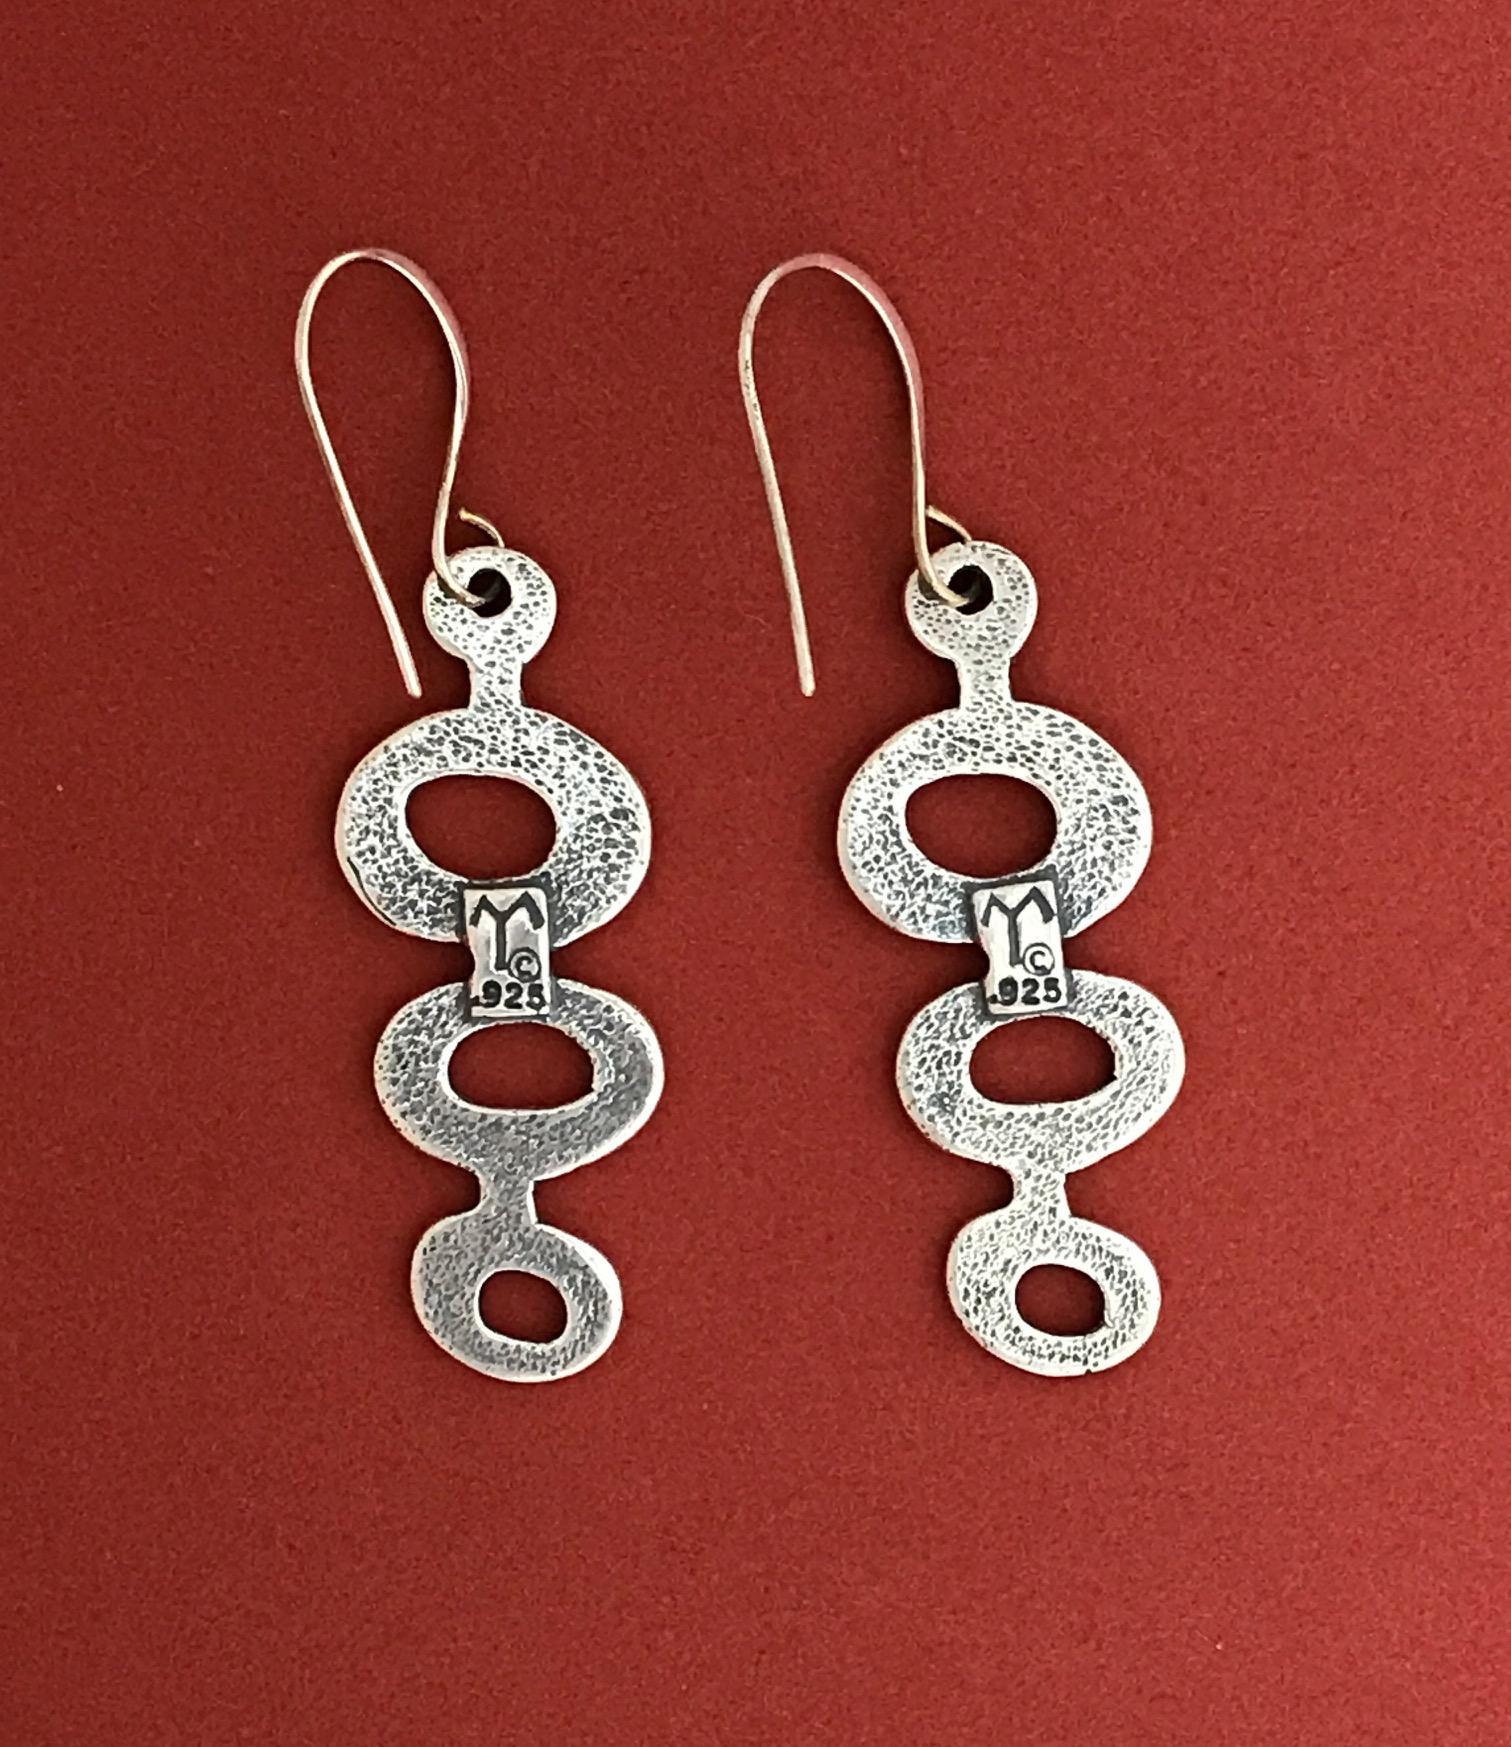 Spirit Ponds, Melanie Yazzie cast sterling silver dangle earrings Native America

Sterling Silver casting  Melanie A. Yazzie (Navajo-Diné) is a highly regarded multimedia artist known for her printmaking, paintings, sculpture, and jewelry designs.